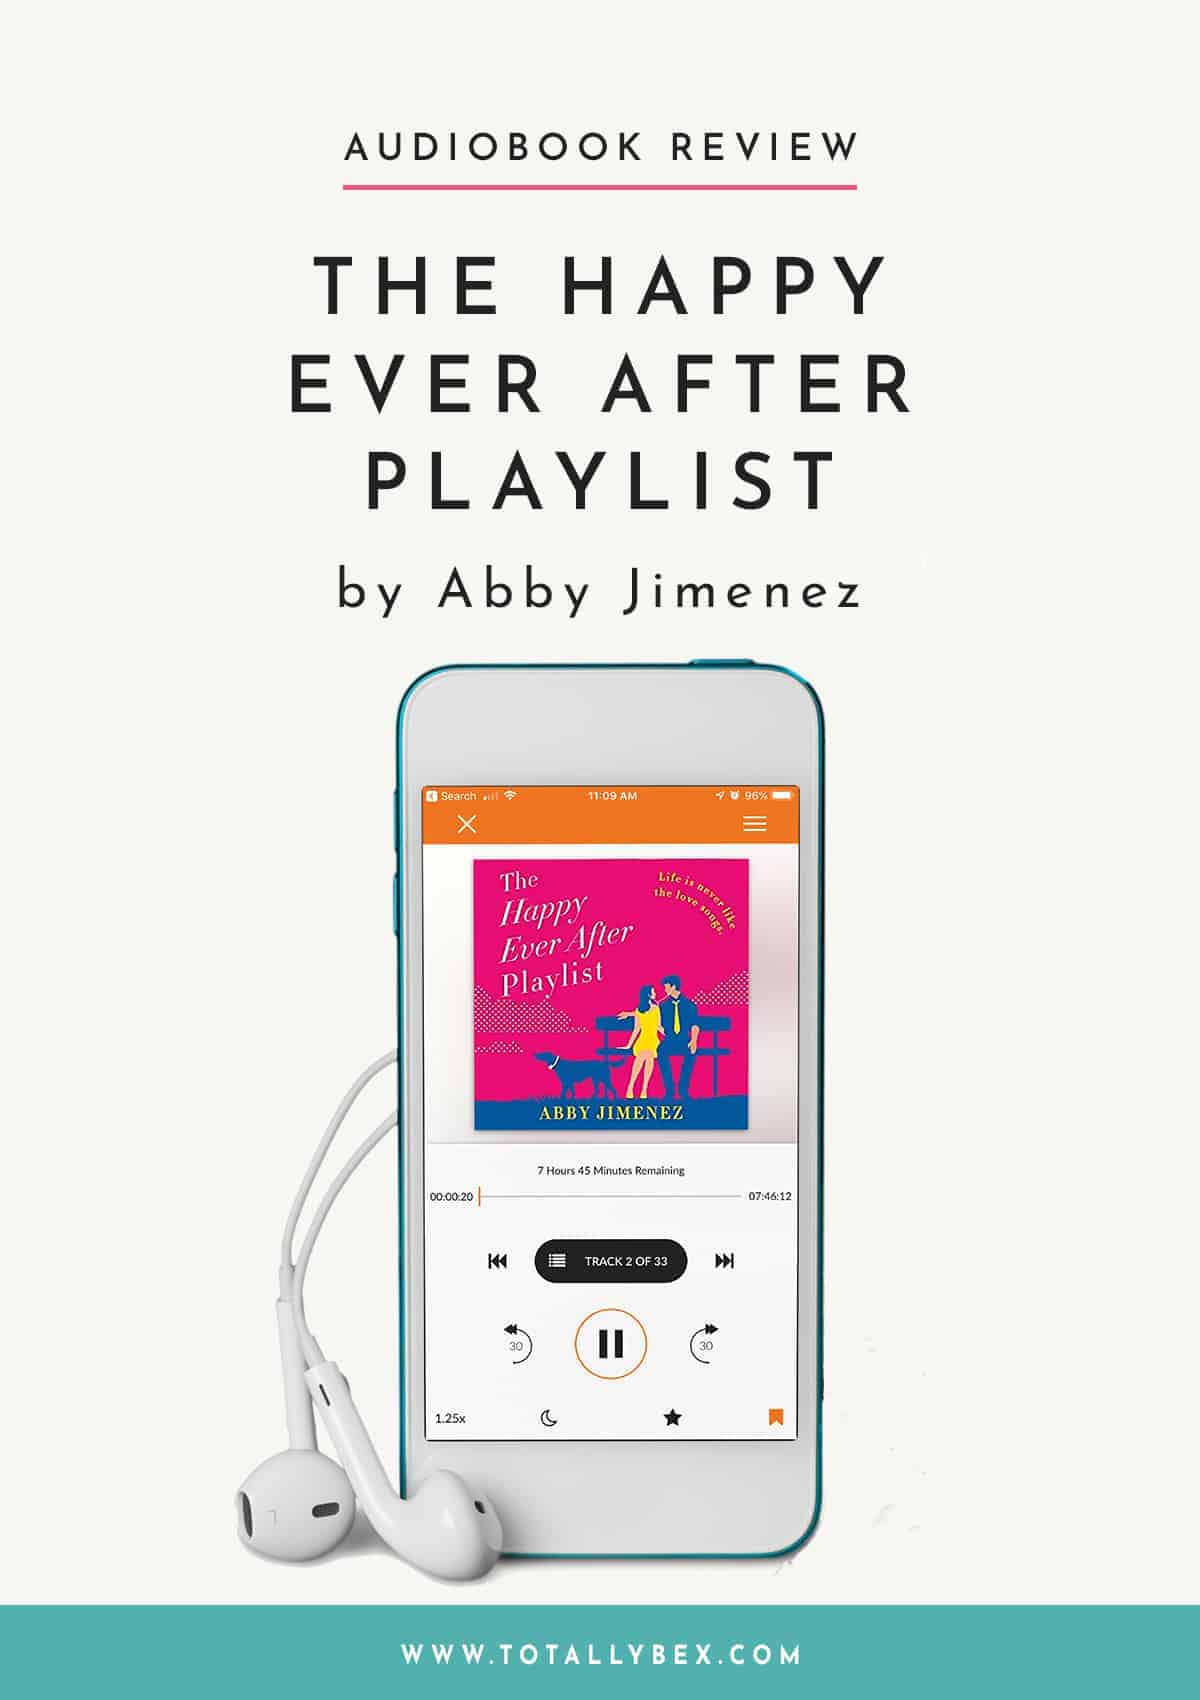 The Happy Ever After Playlist by Abby Jimenez on audiobook is pretty close to perfection—between the fresh and snappy writing, the witty banter, and the heartwarming romance, I couldn’t stop smiling!